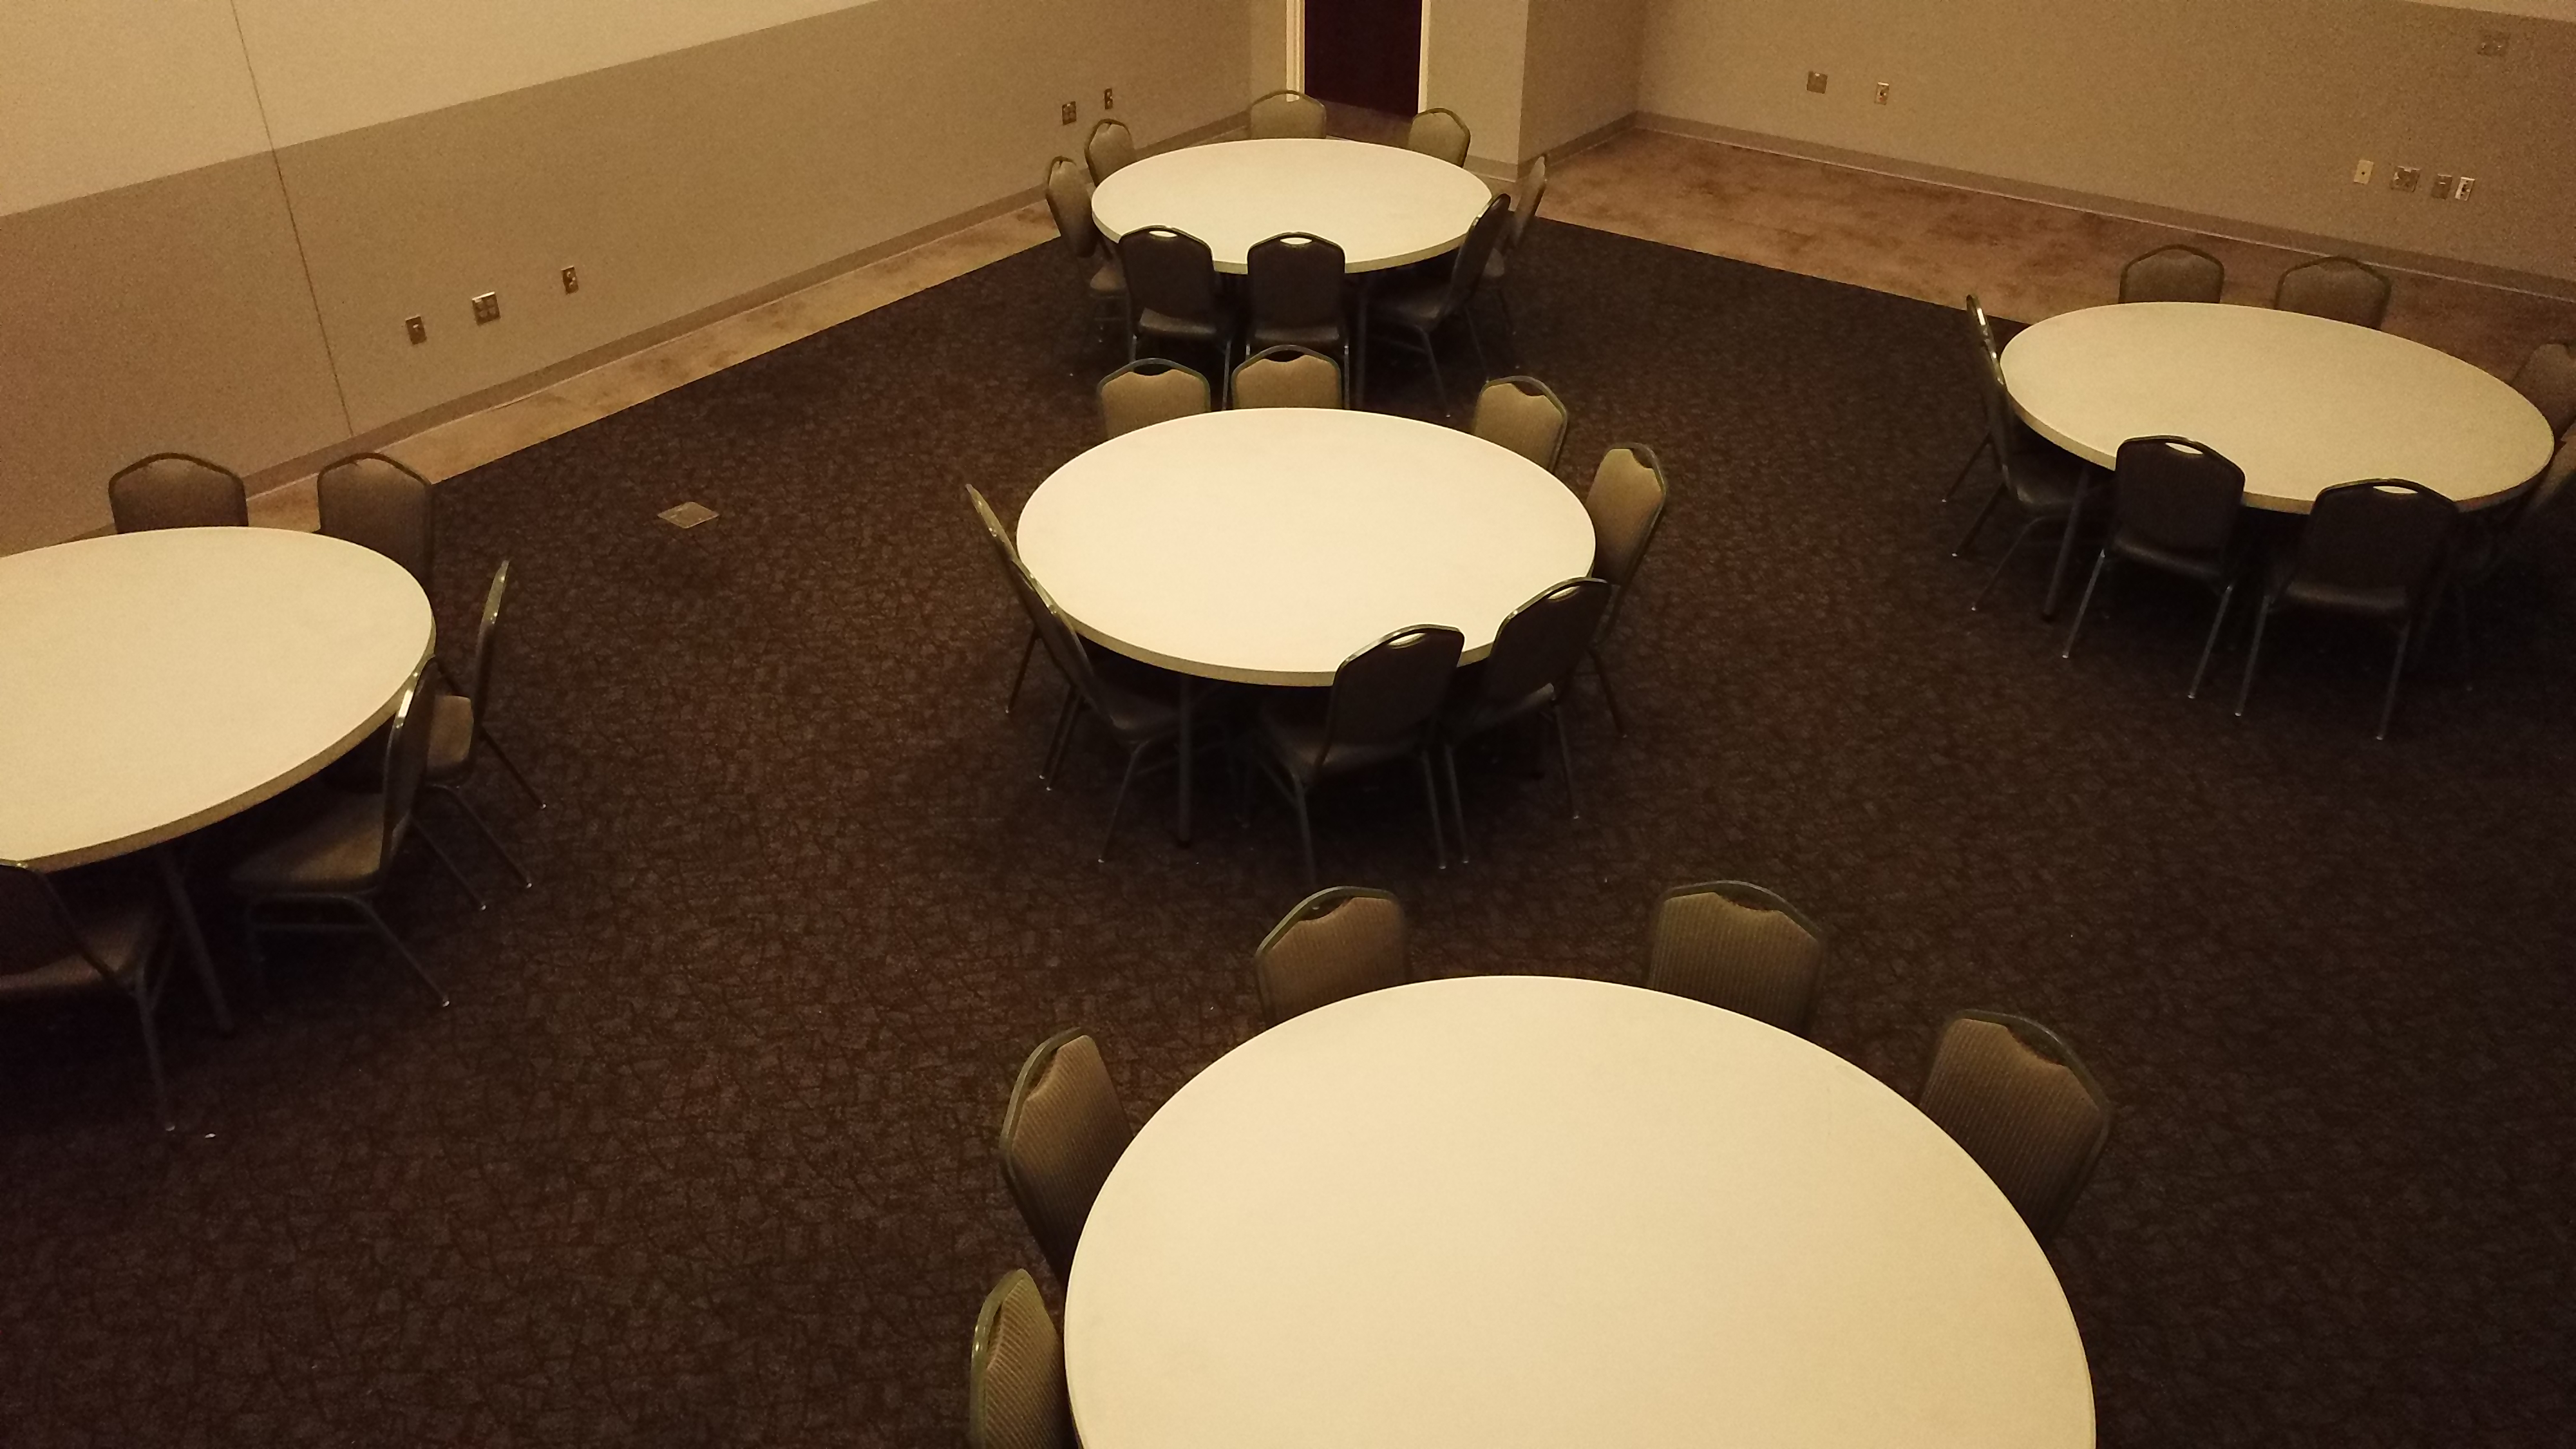 Room with round tables and chairs